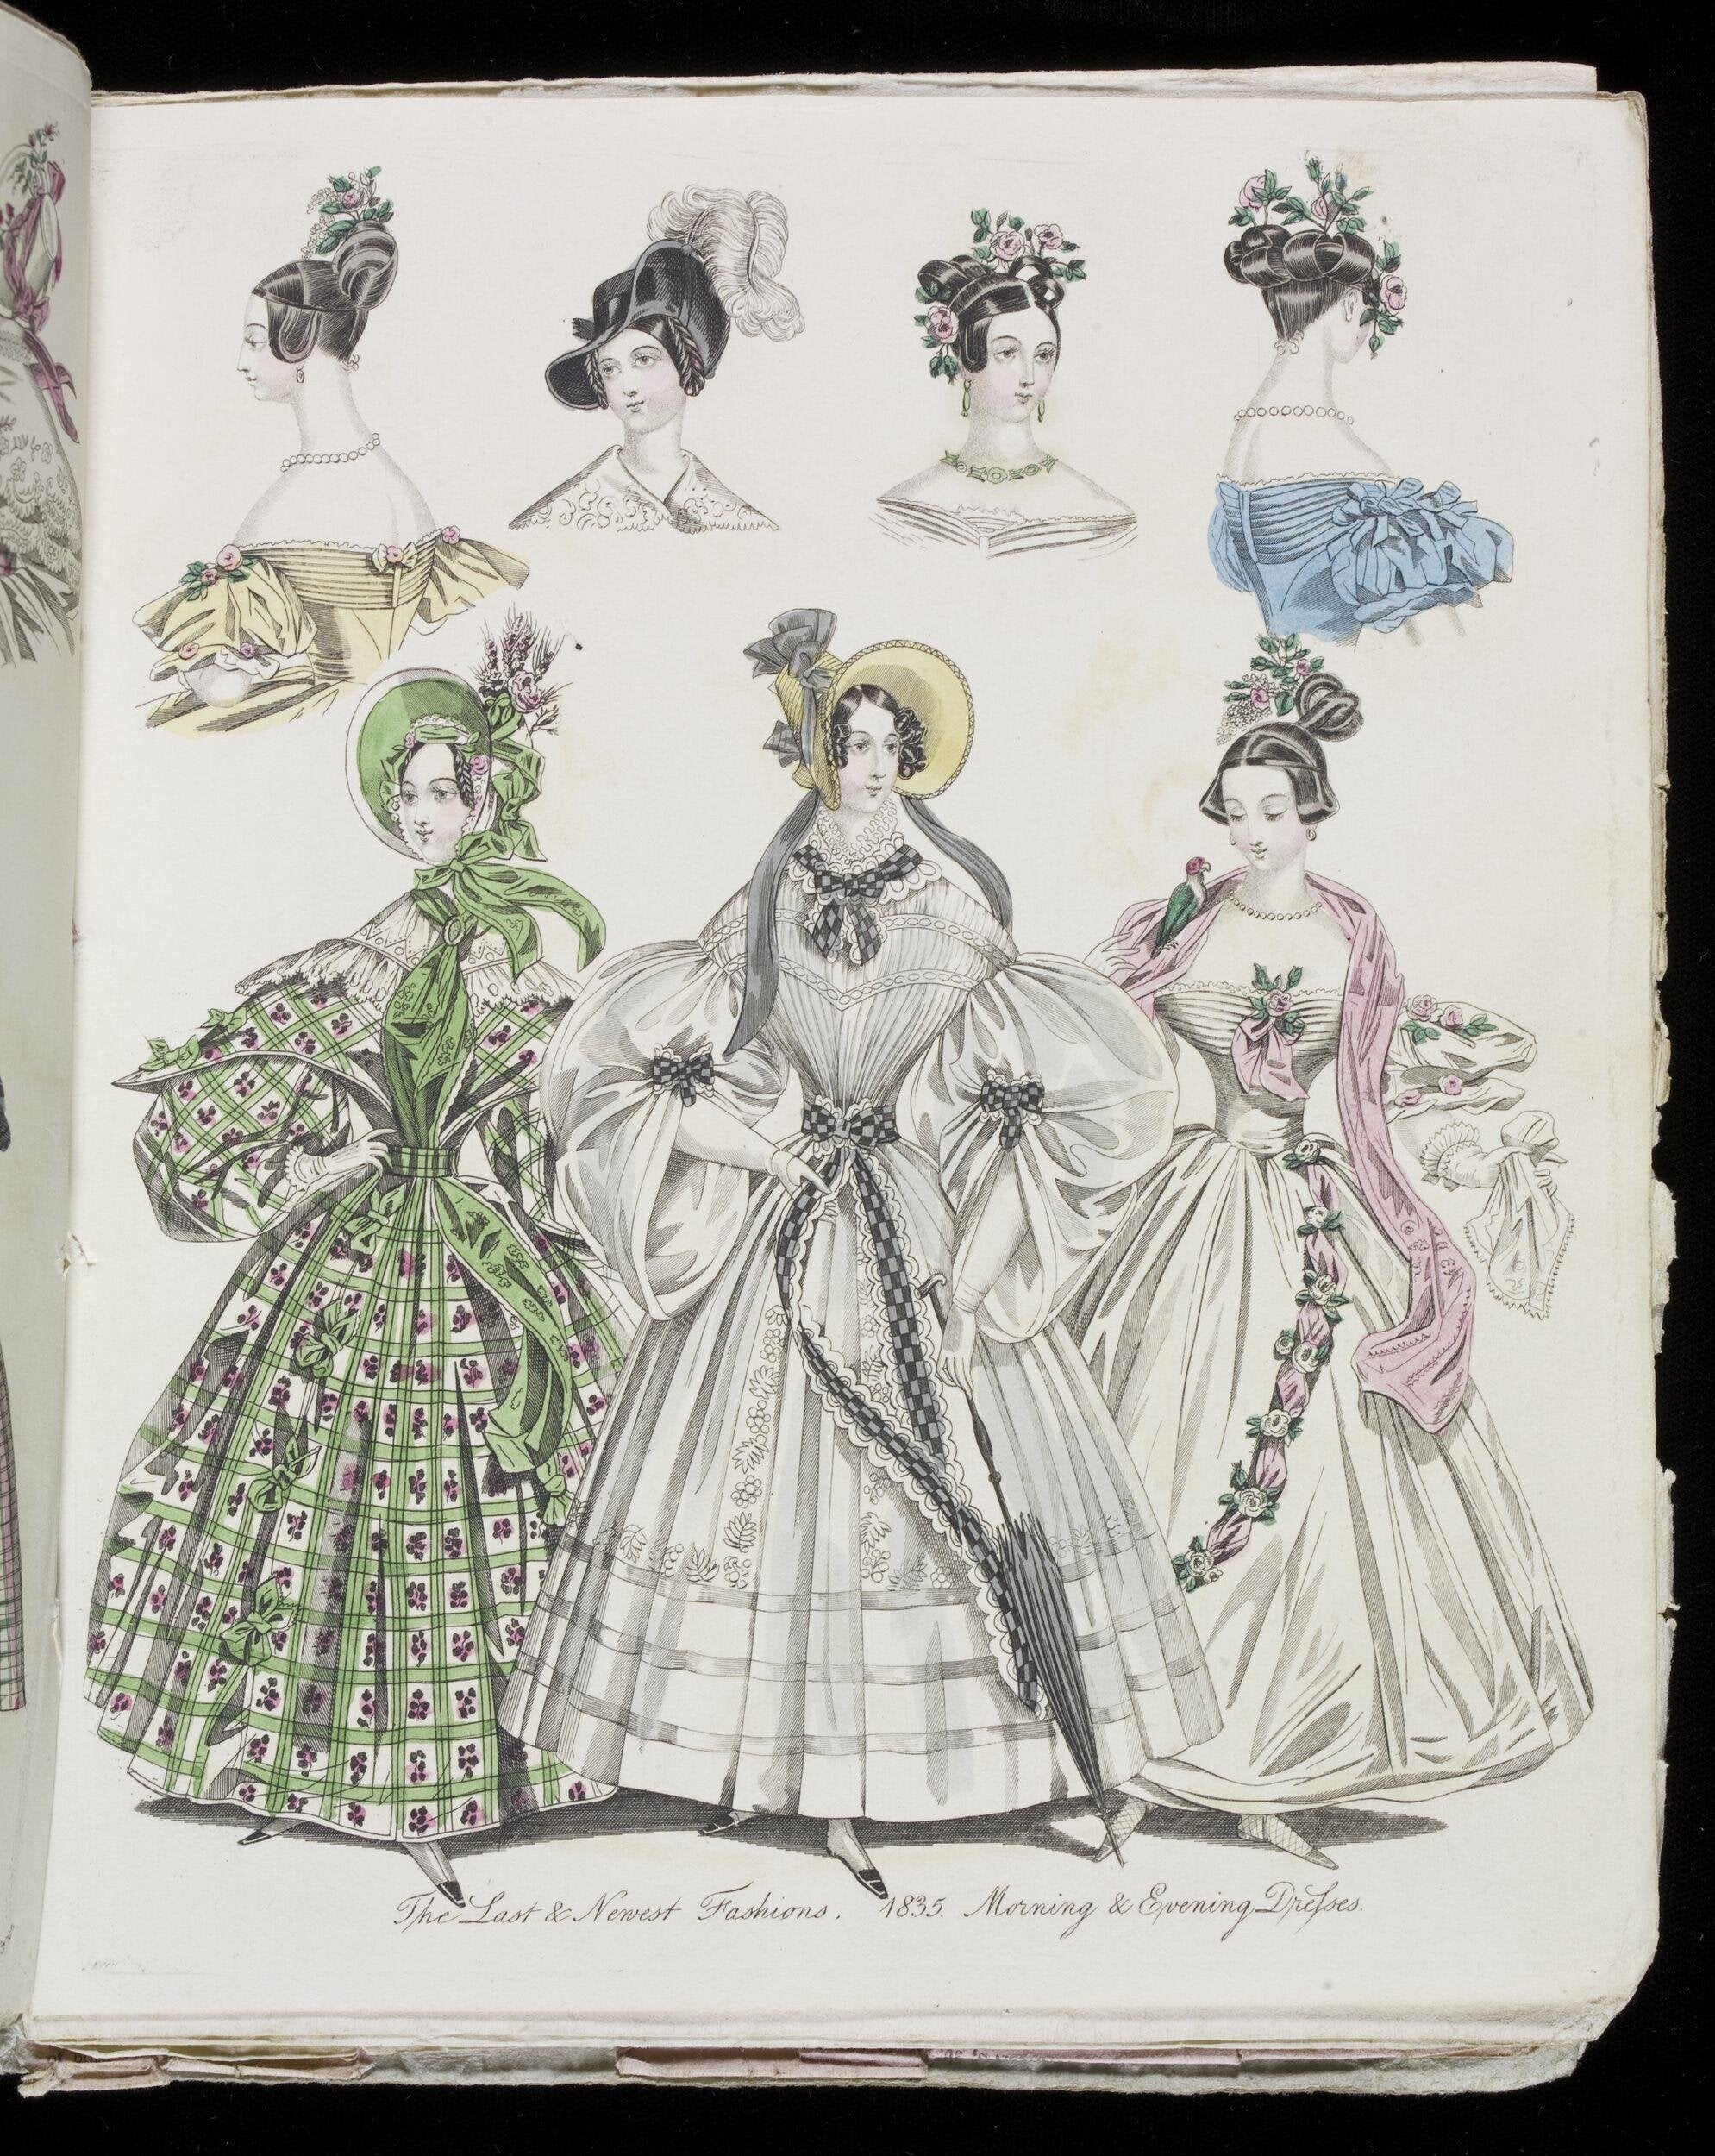 Period Clothing at the Victoria & Albert Museum in London